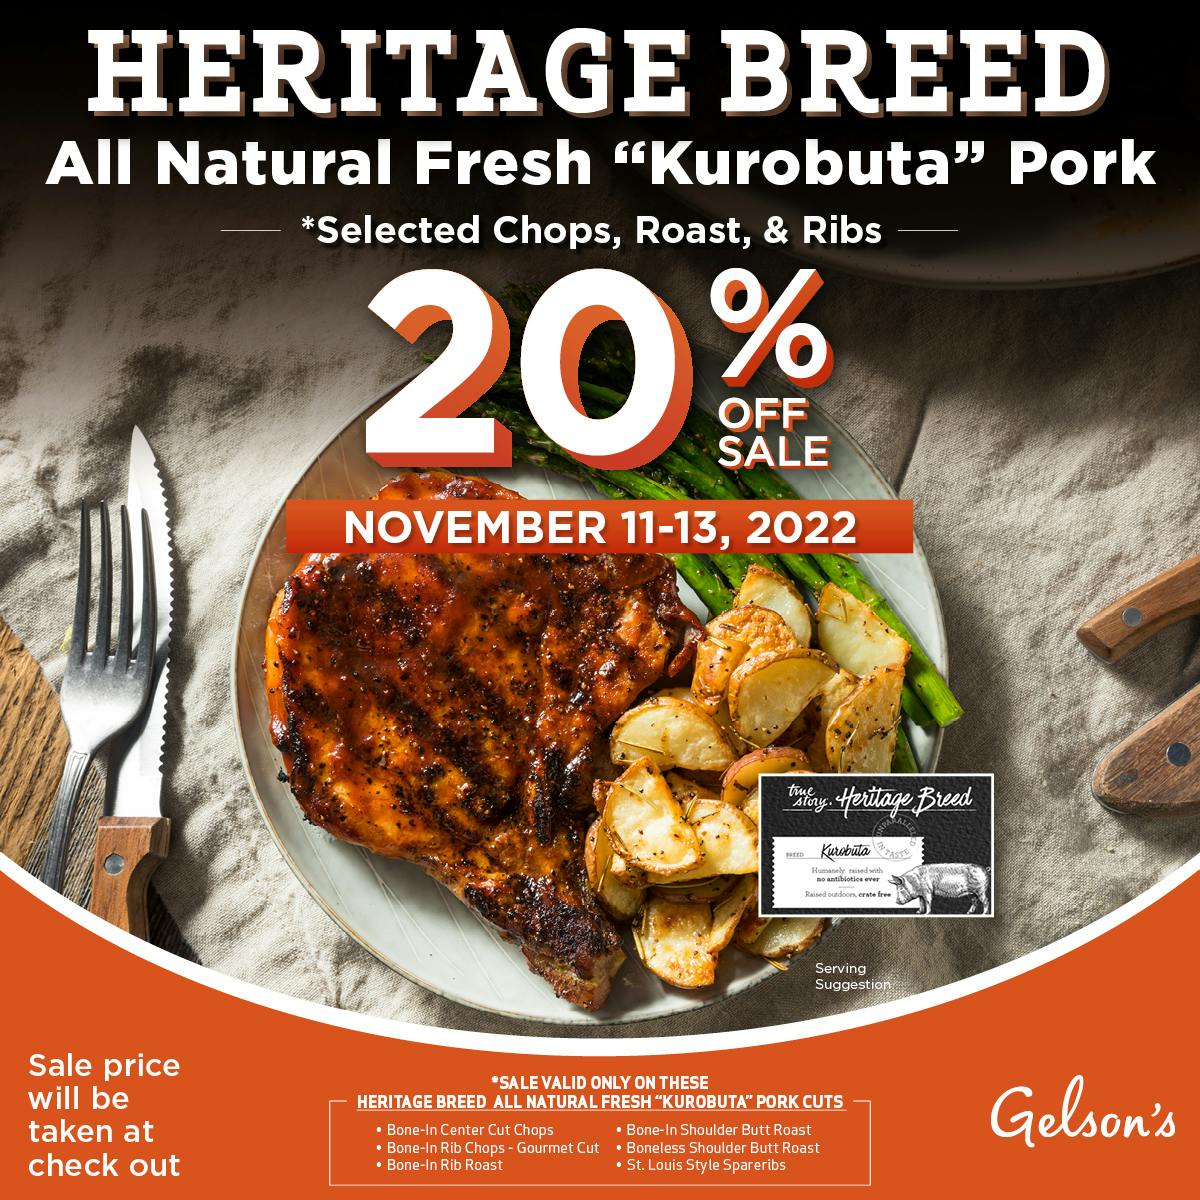 Heritage Breed All Natural Fresh "Kurobuta" Pork *Selected Chops, Roast, & Ribs. 20% Off Sale November 11-12, 2022. Sale price will be taken at check out. Sale valid only on these Heritage Breed all natural fresh "Korobuta" Pork Cuts -Bone-in Center Cut Chops - Bone-In Rib Chops - Gourmet Cut - Bone-In Rib Roast - Bone-In Shoulder Butt Roast - Boneless Shoulder Butt Roast - St. Louis Style Spareribs